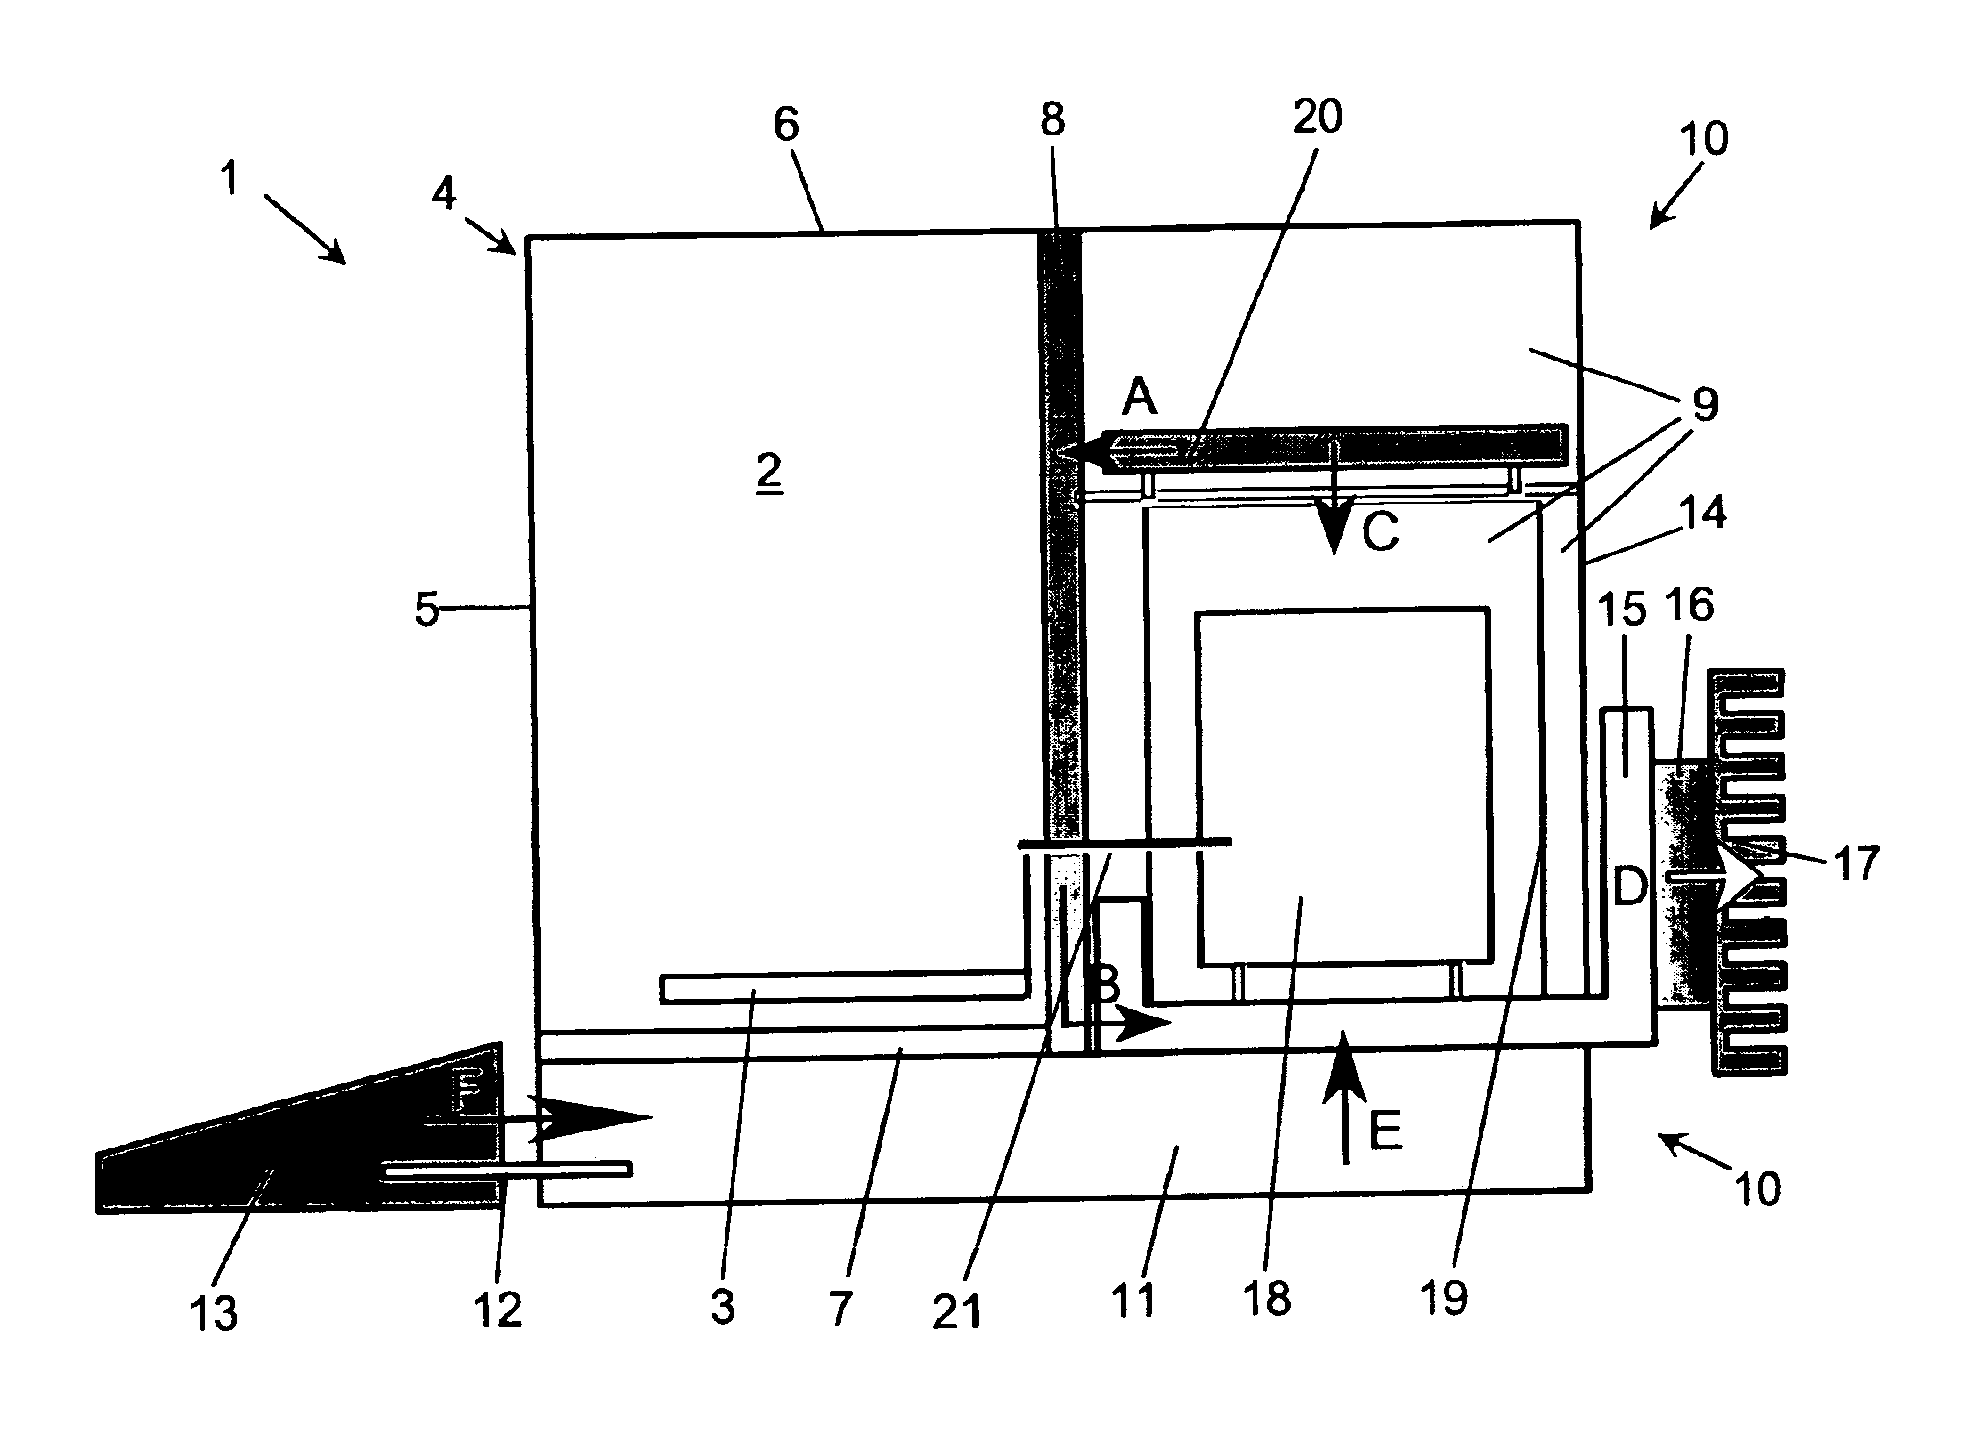 Balance with a heat removing device